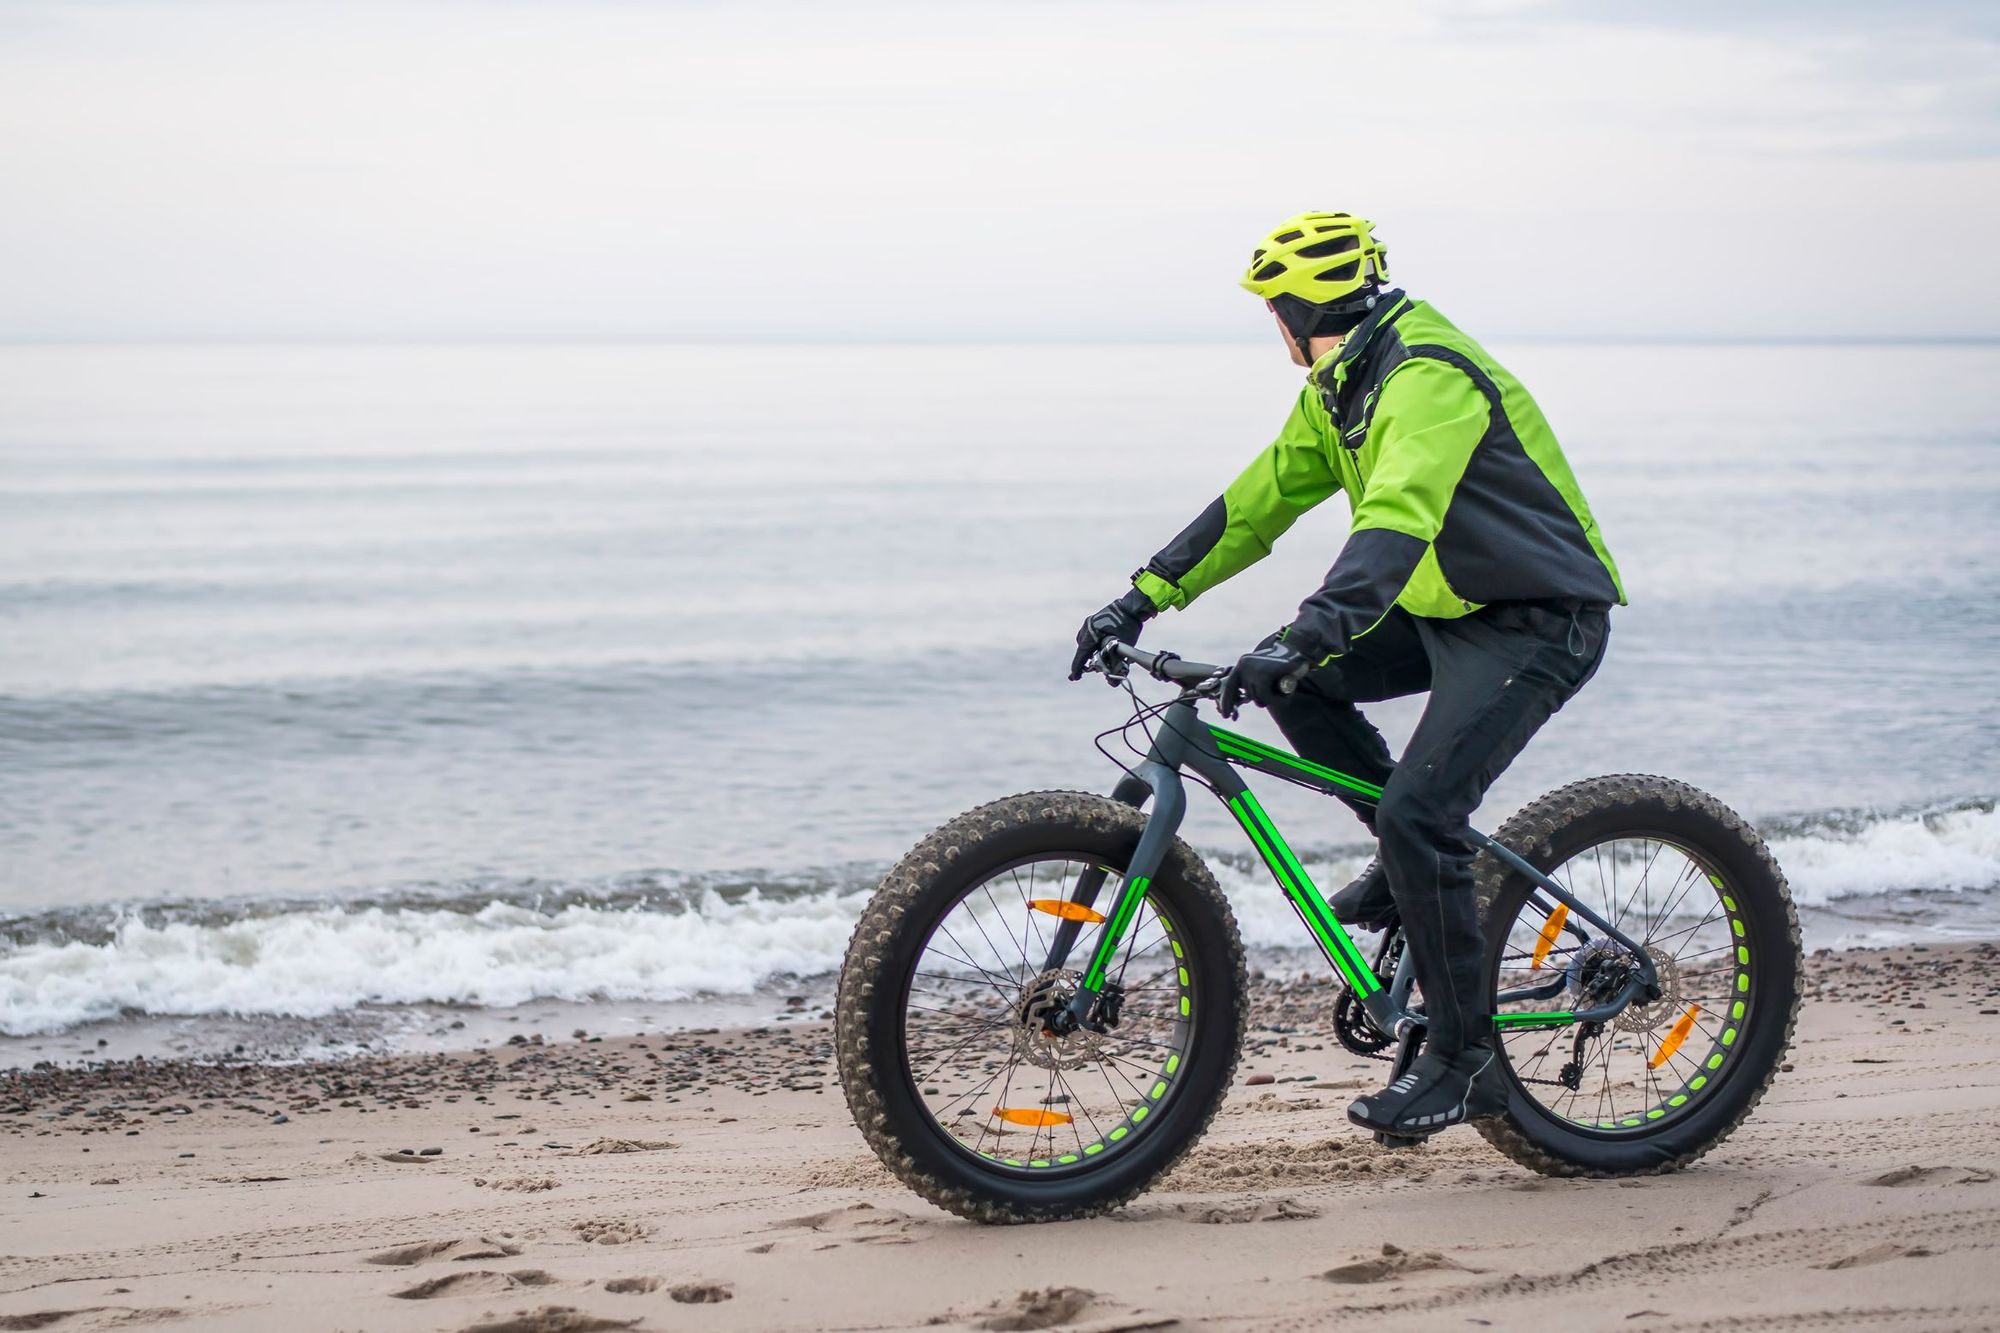 Male rider on a fatbike, riding on a beach.